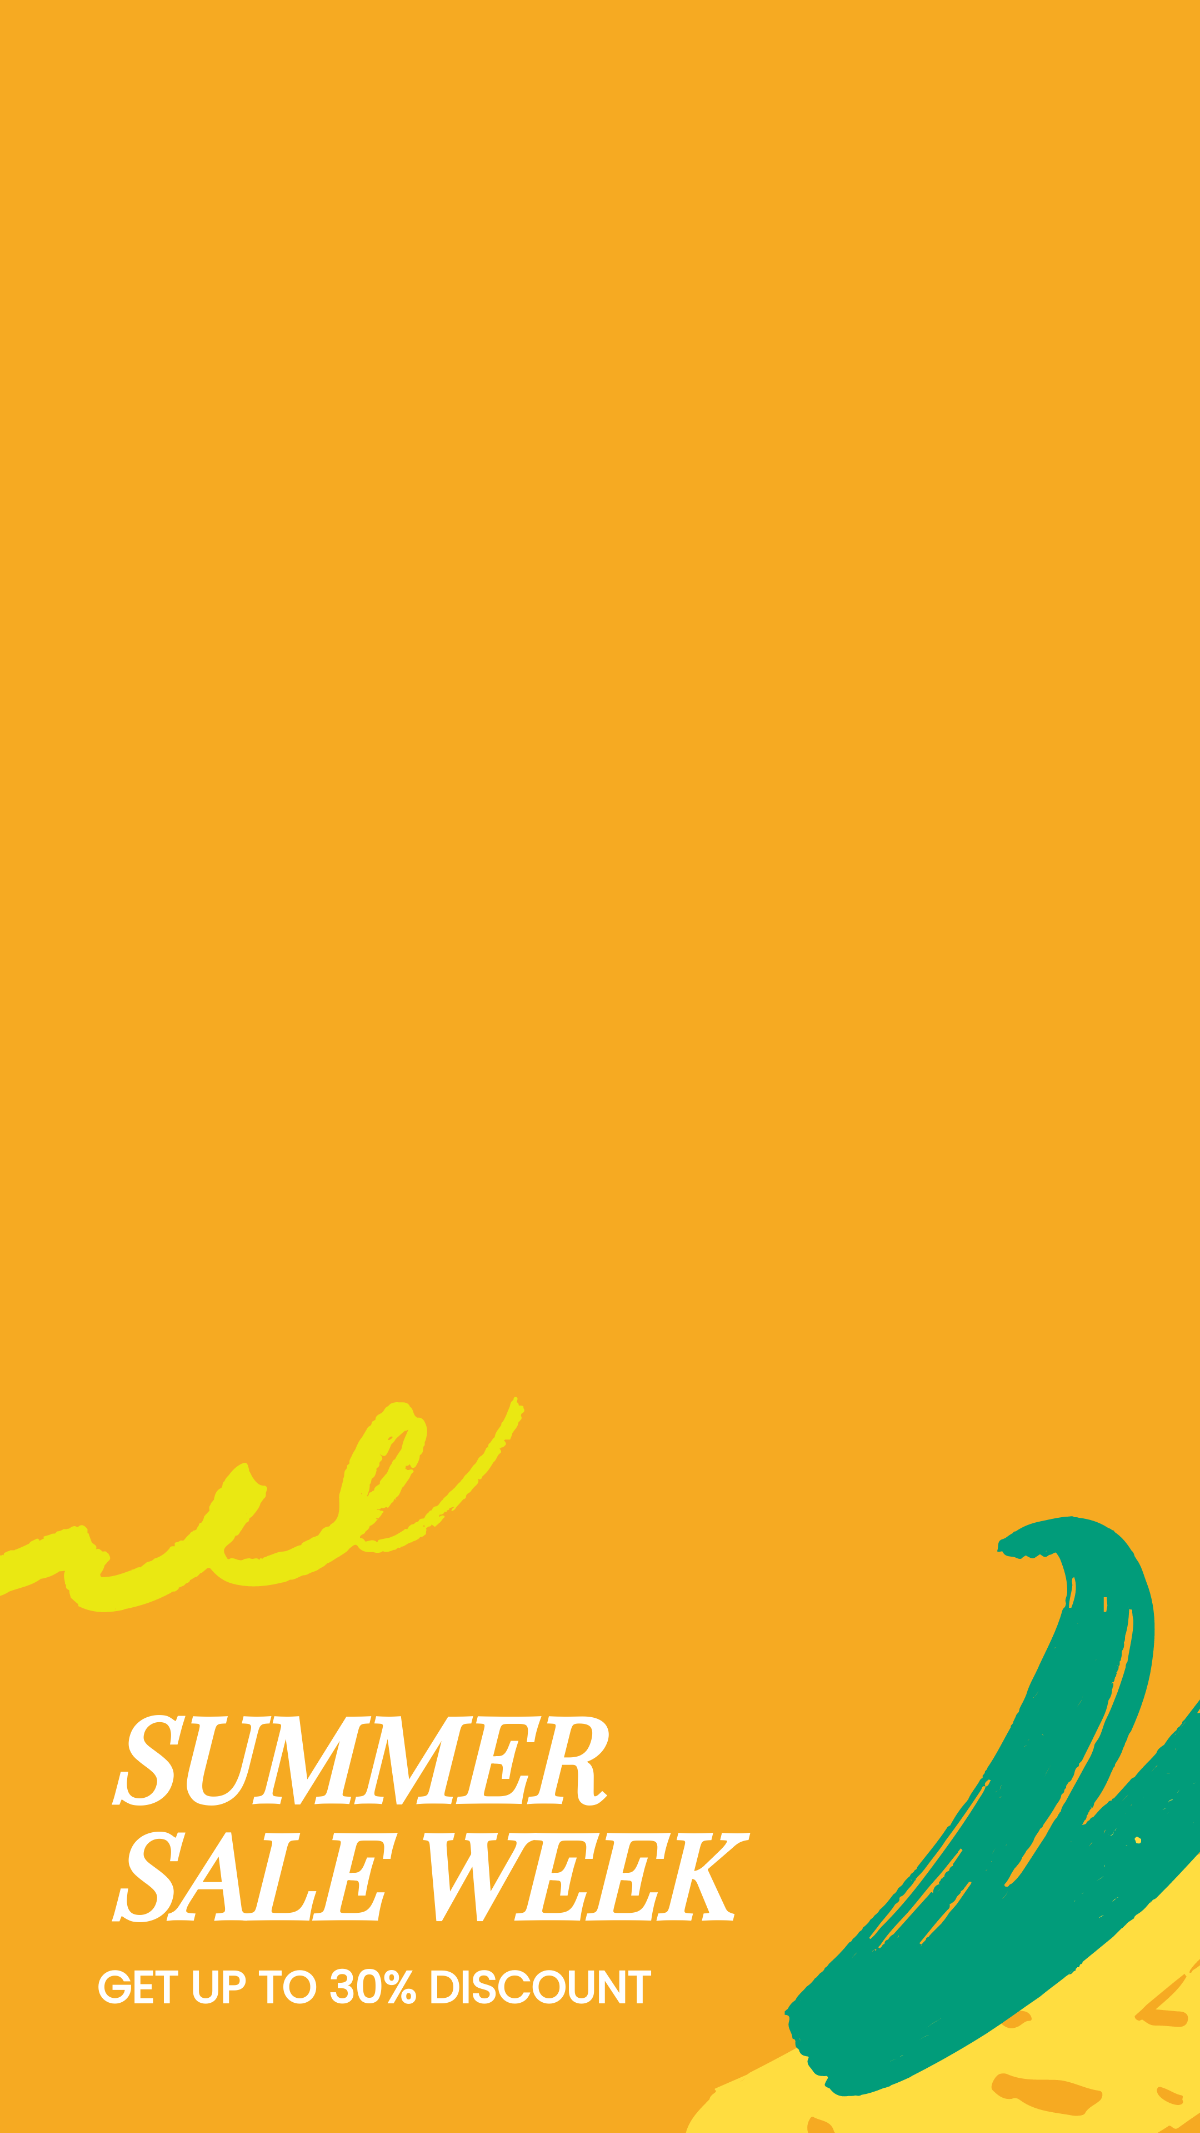 Free Summer Sale Snapchat Geofilter Template